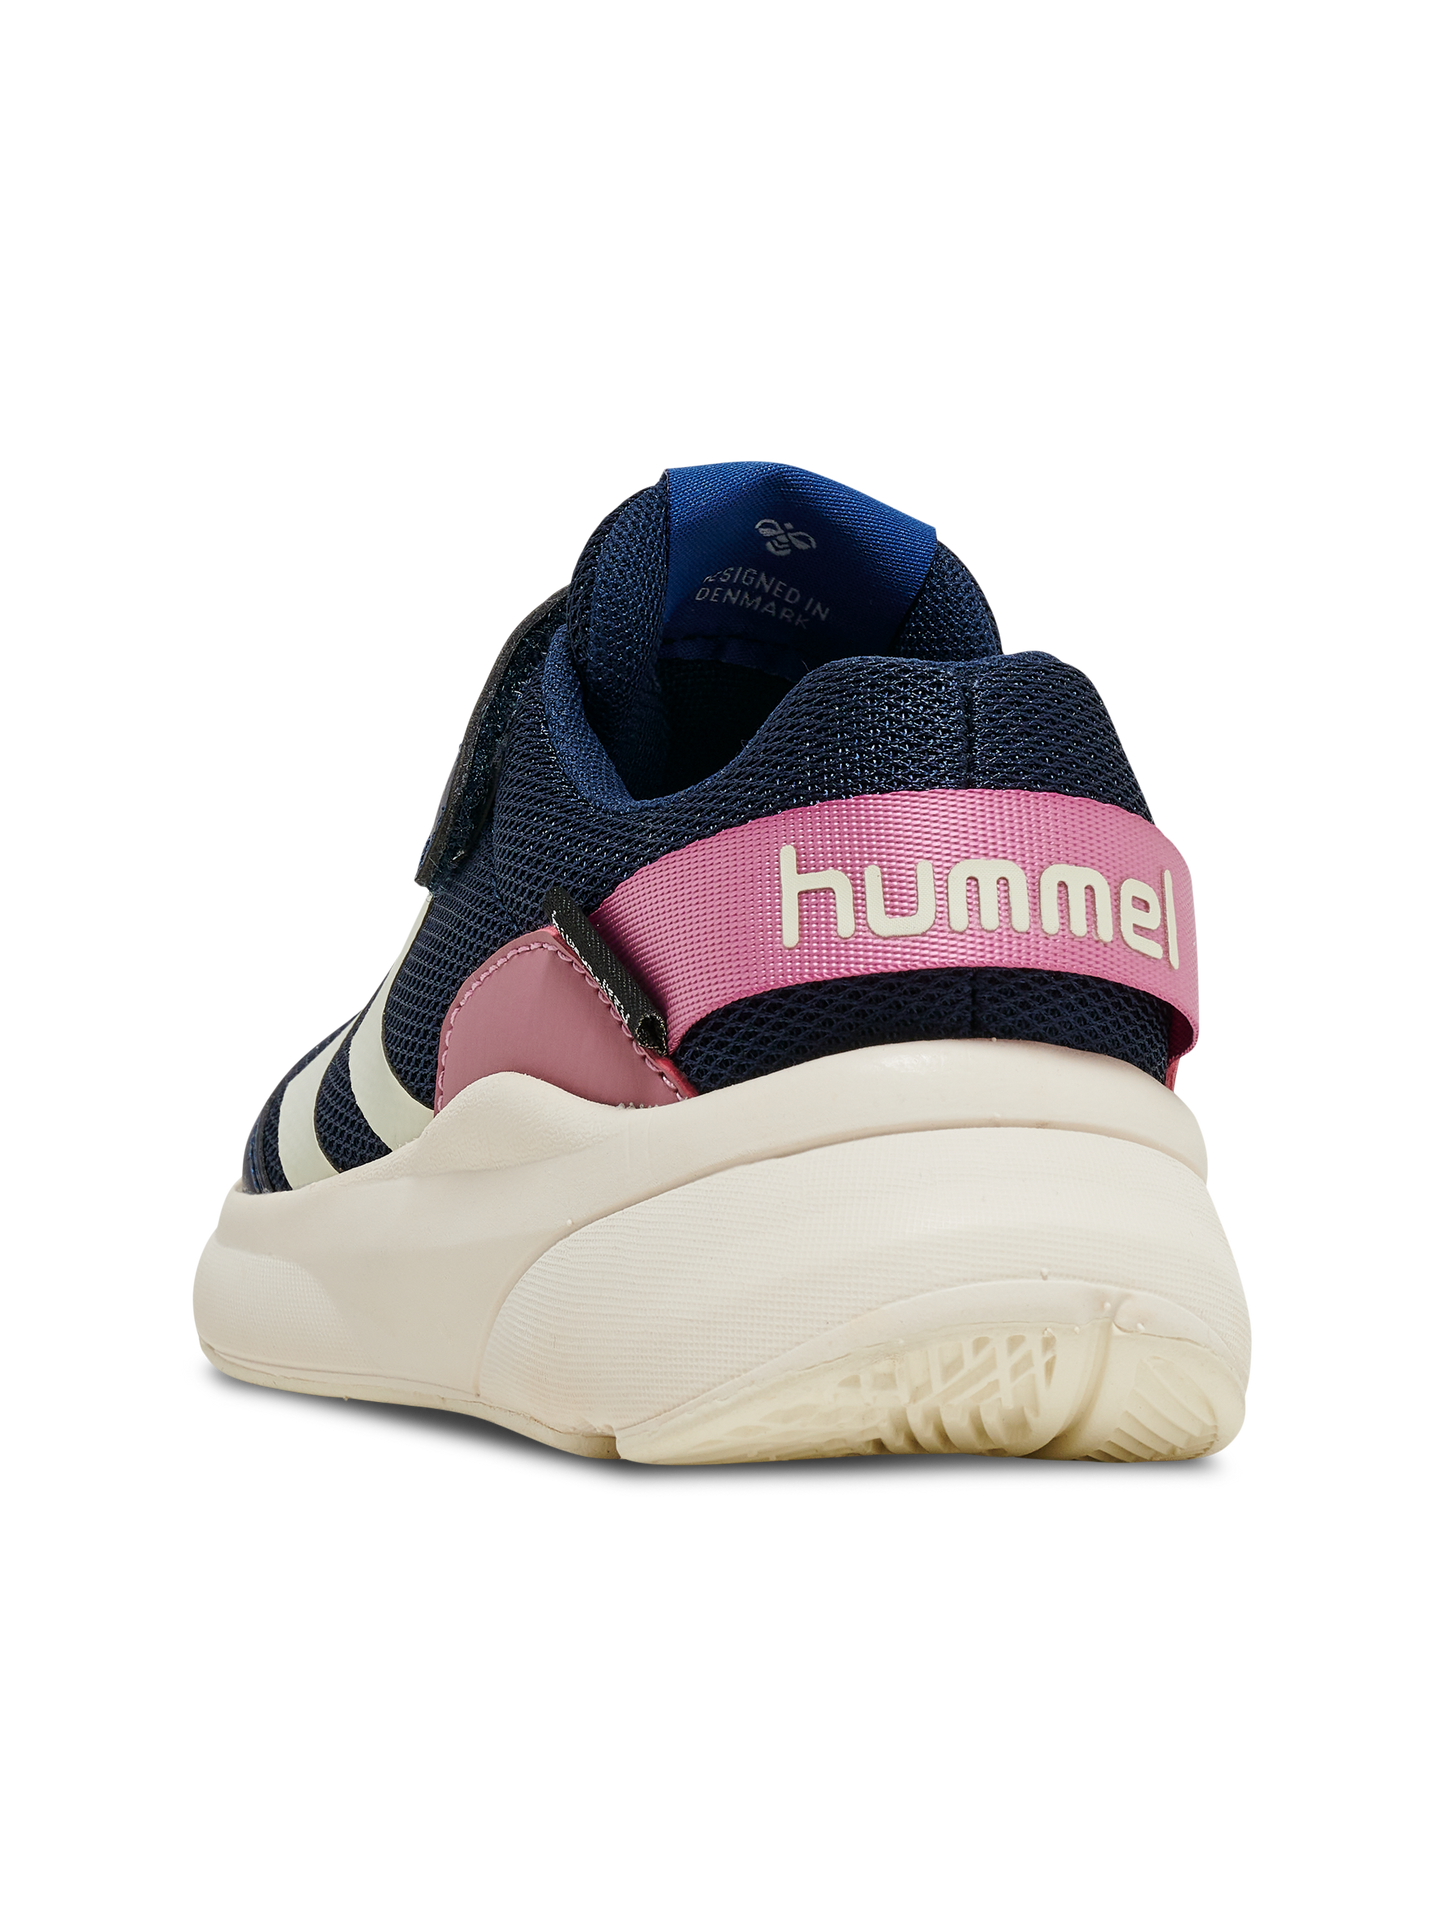 Hummel Black Iris and Pink Reach Water Resistant Trainers